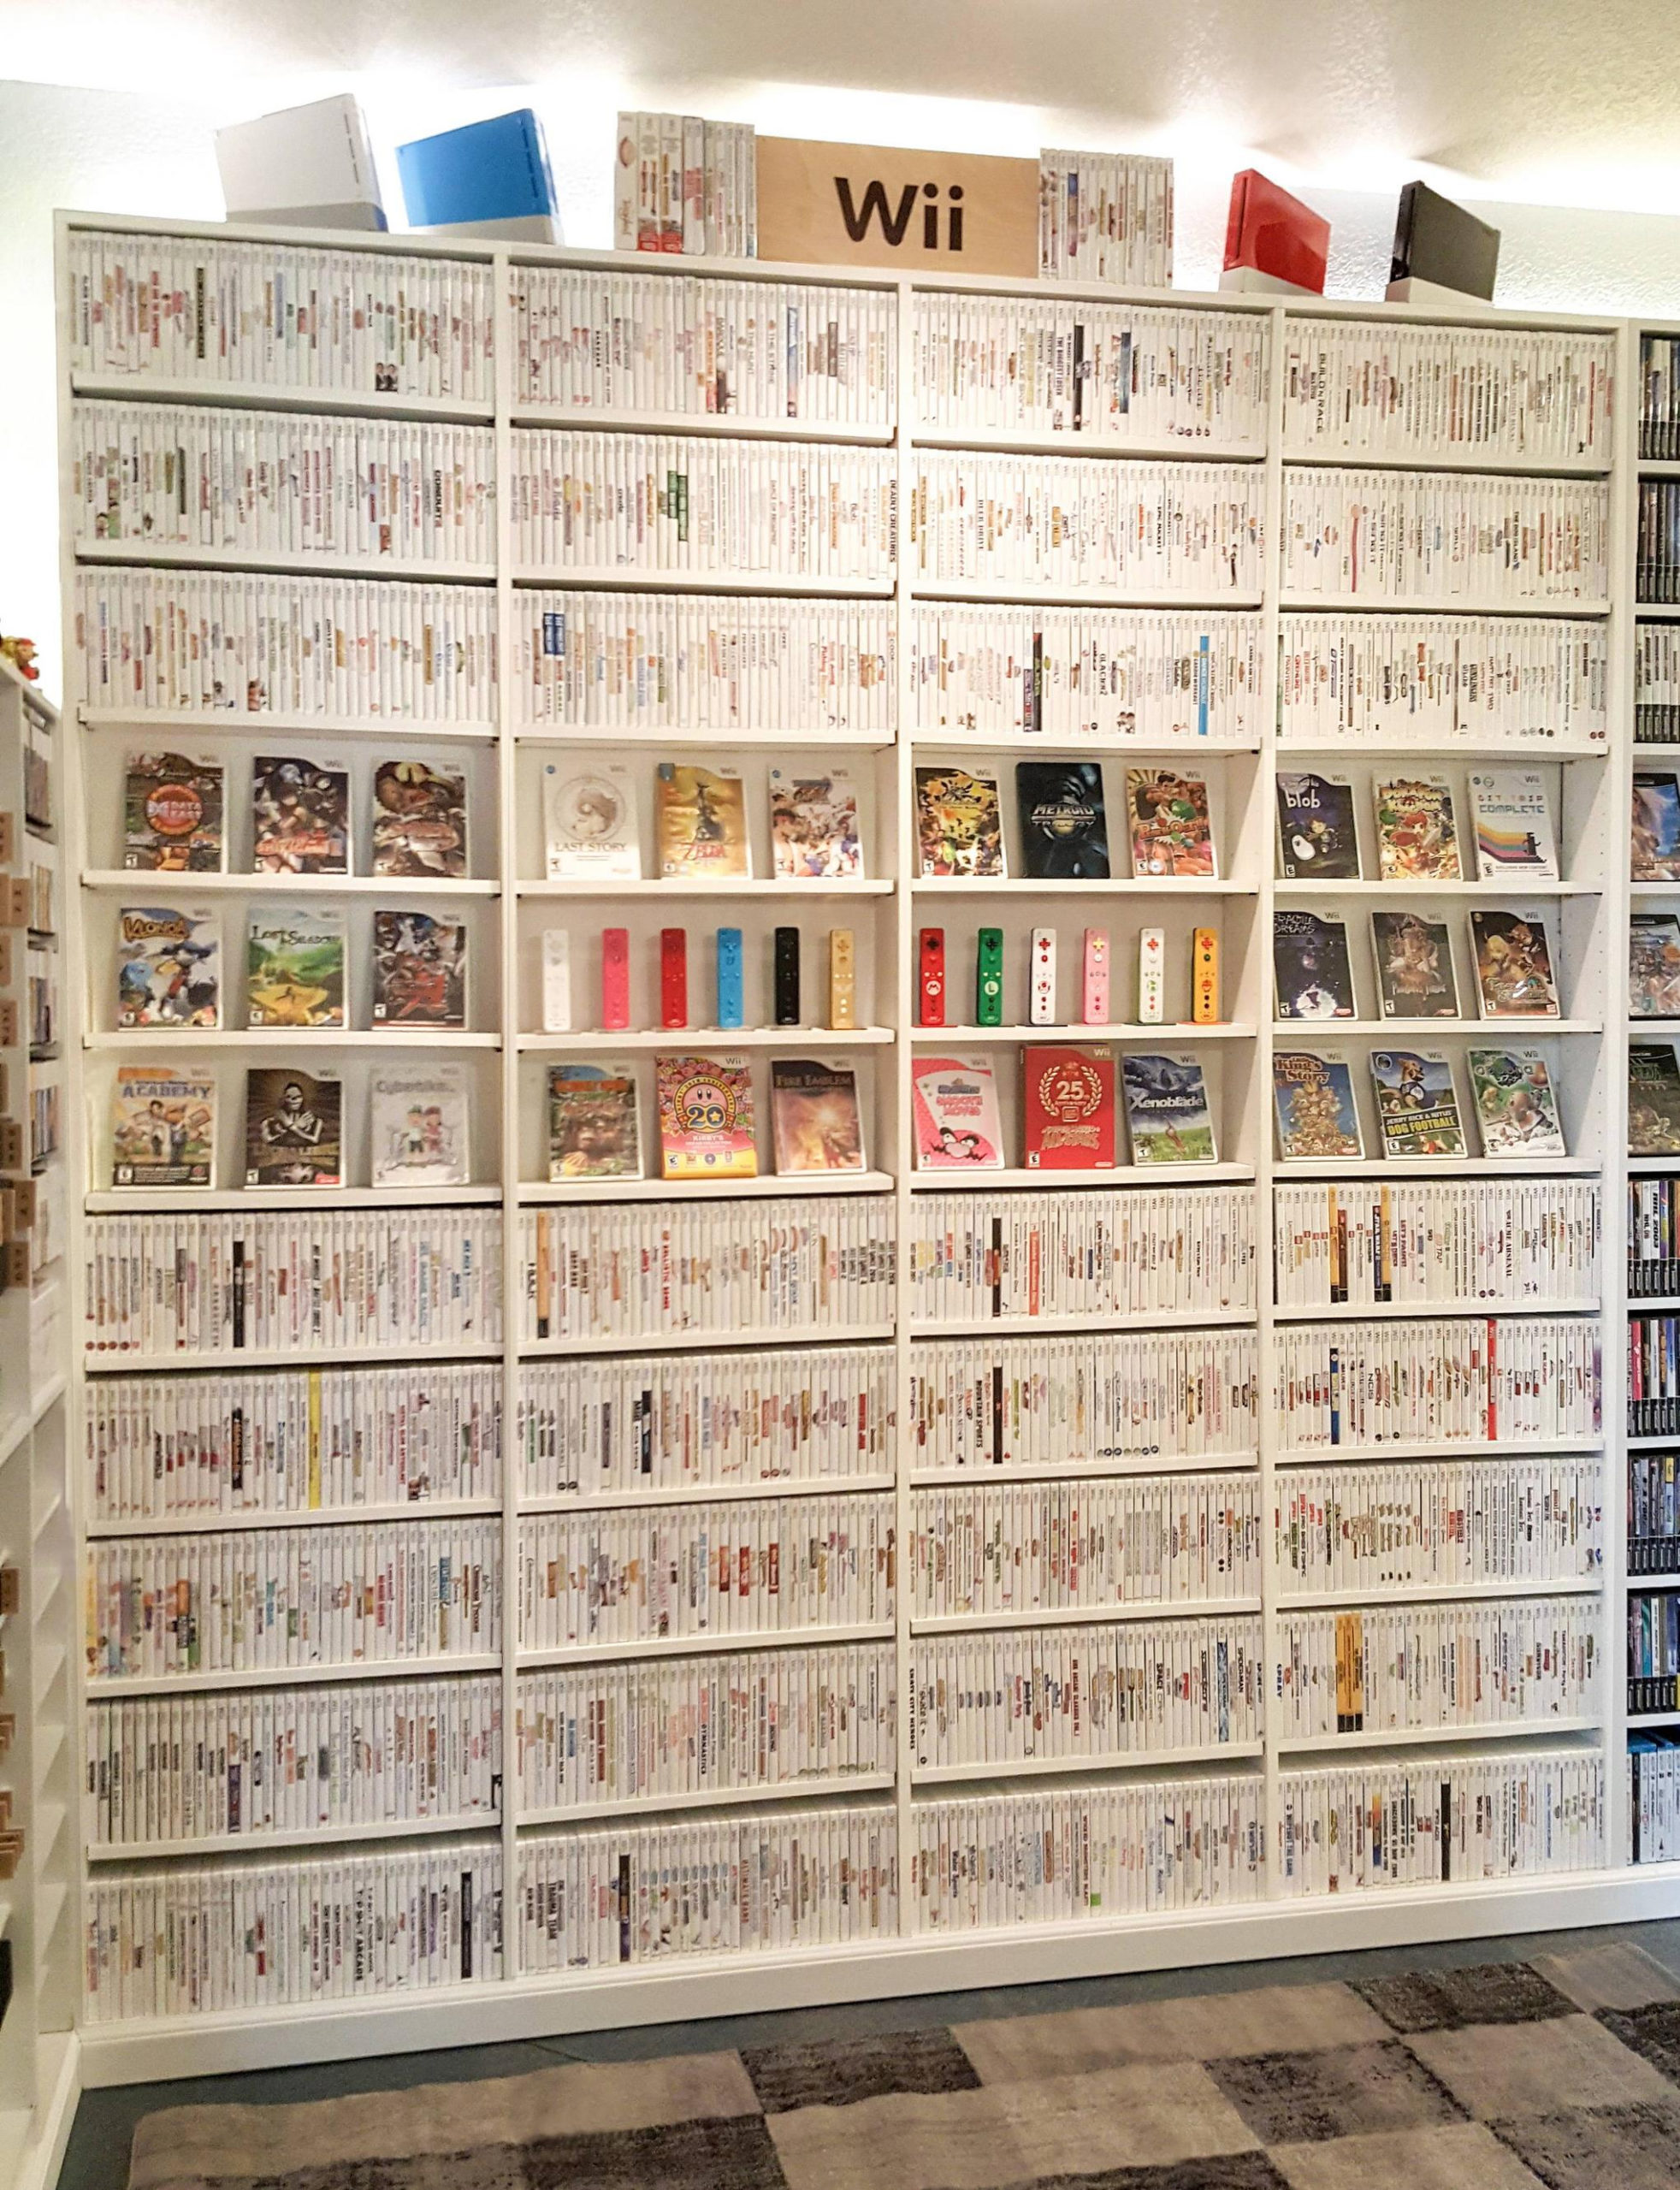 A Complete Wii Collection Is An Impressive Sight